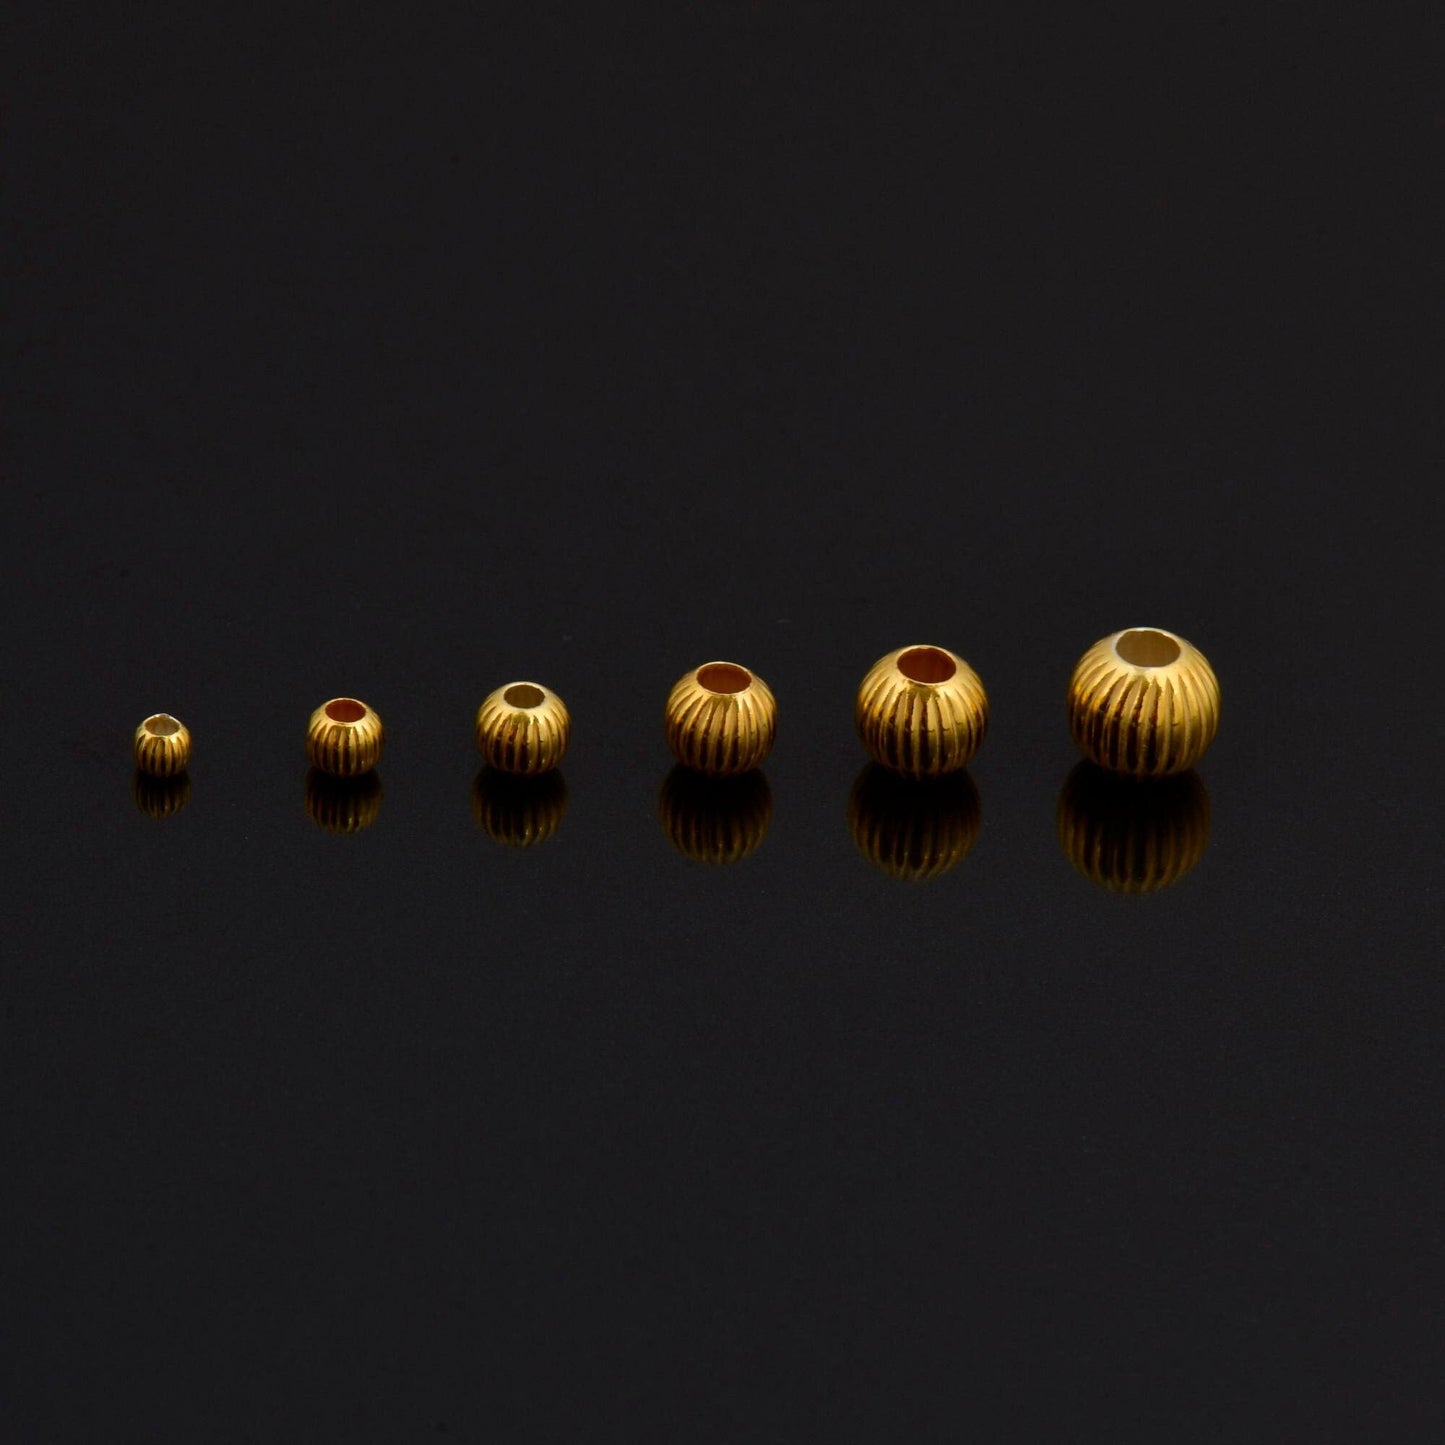 Silver Corrugated Round Beads in 24K Gold Vermeil, 24K Gold Plated Seamless Round Beads, Round Seperator Beads, Jewelry Supplies, M/VM5 A-F